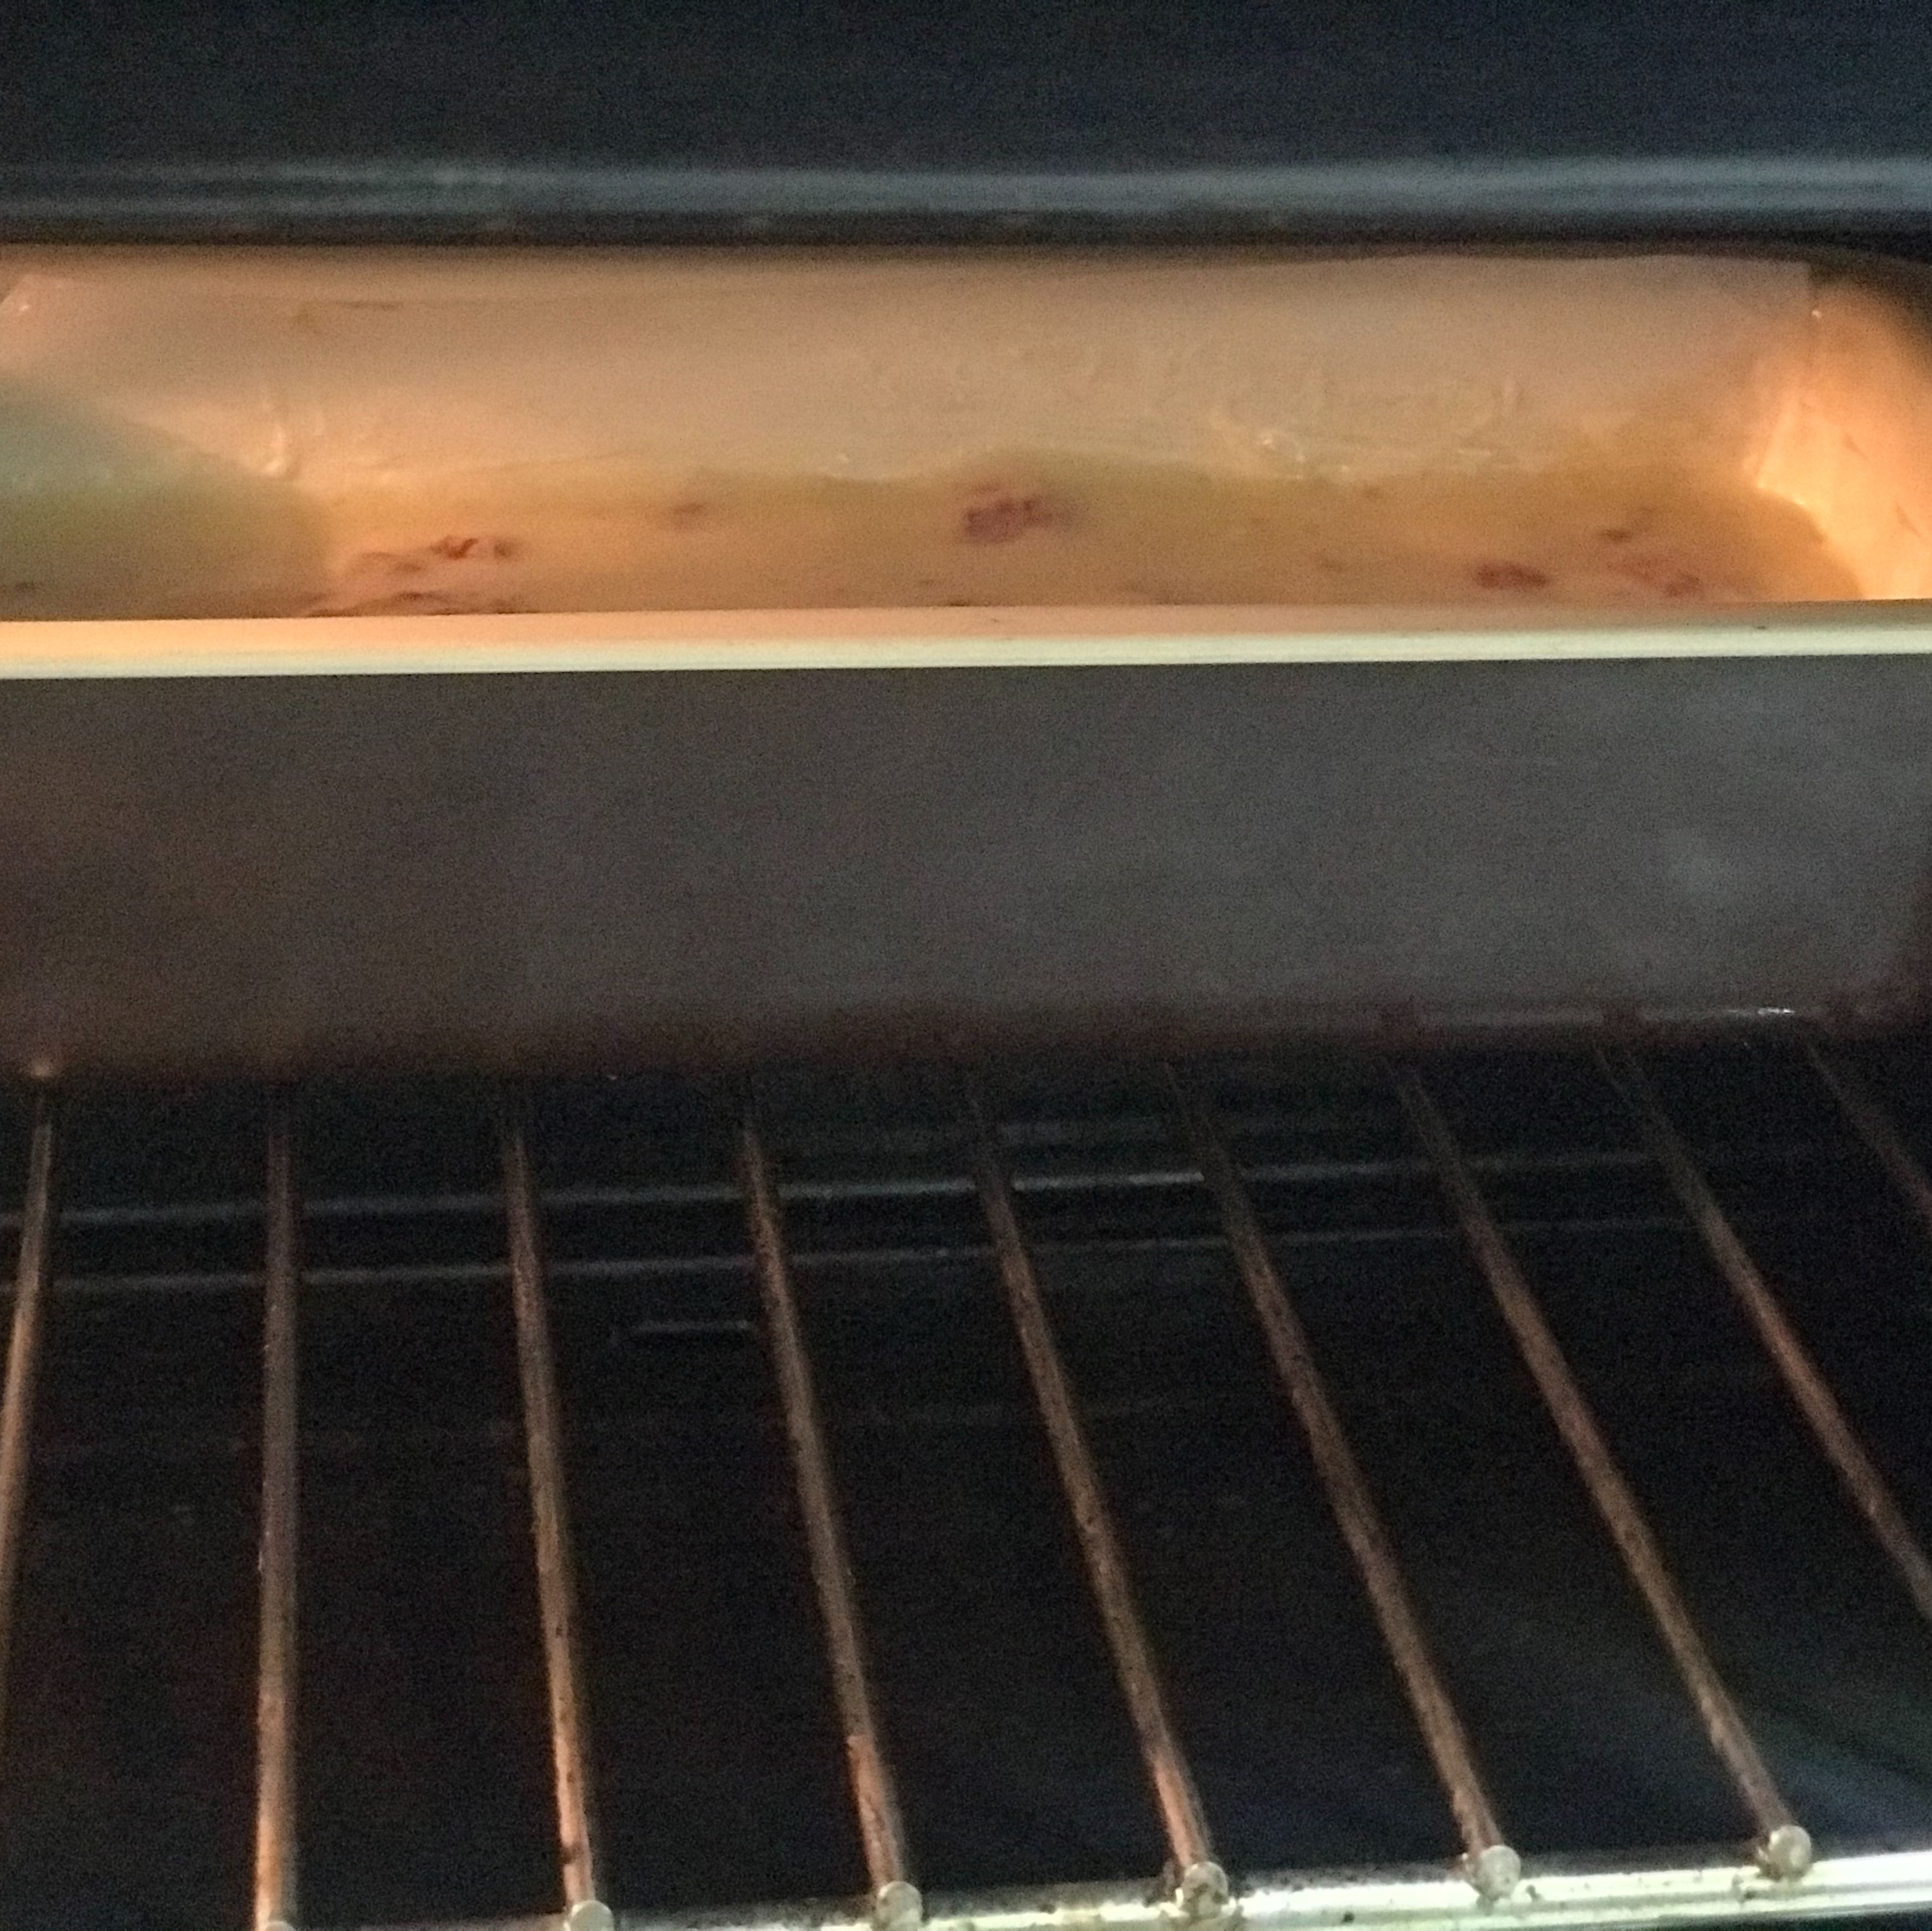 To the oven 180 c for 20 minutes,